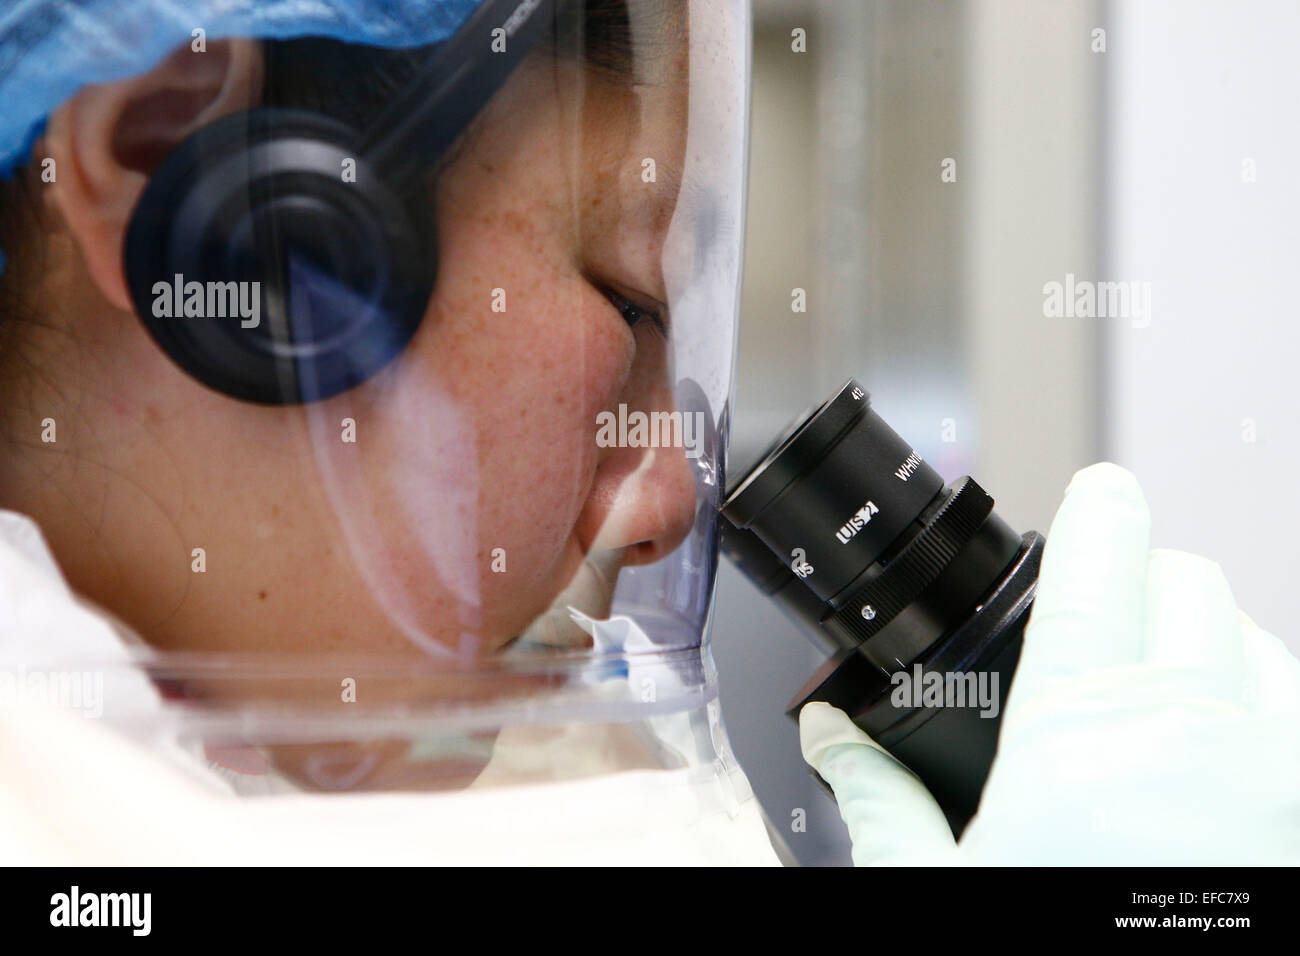 Wuhan, China's Hubei Province. 30th Jan, 2015. A researcher takes part in a drill at the newly-completed lab in Wuhan, capital of central China's Hubei Province, Jan. 30, 2015. China completed its first high level biosafety laboratory based in Wuhan Saturday in Wuhan after more than a decade of construction. The lab will be used to study class four pathogens (P4), which refers to the most virulent viruses that pose a high risk of aerosol-transmitted person-to-person infections. © Yin Gang/Xinhua/Alamy Live News Stock Photo